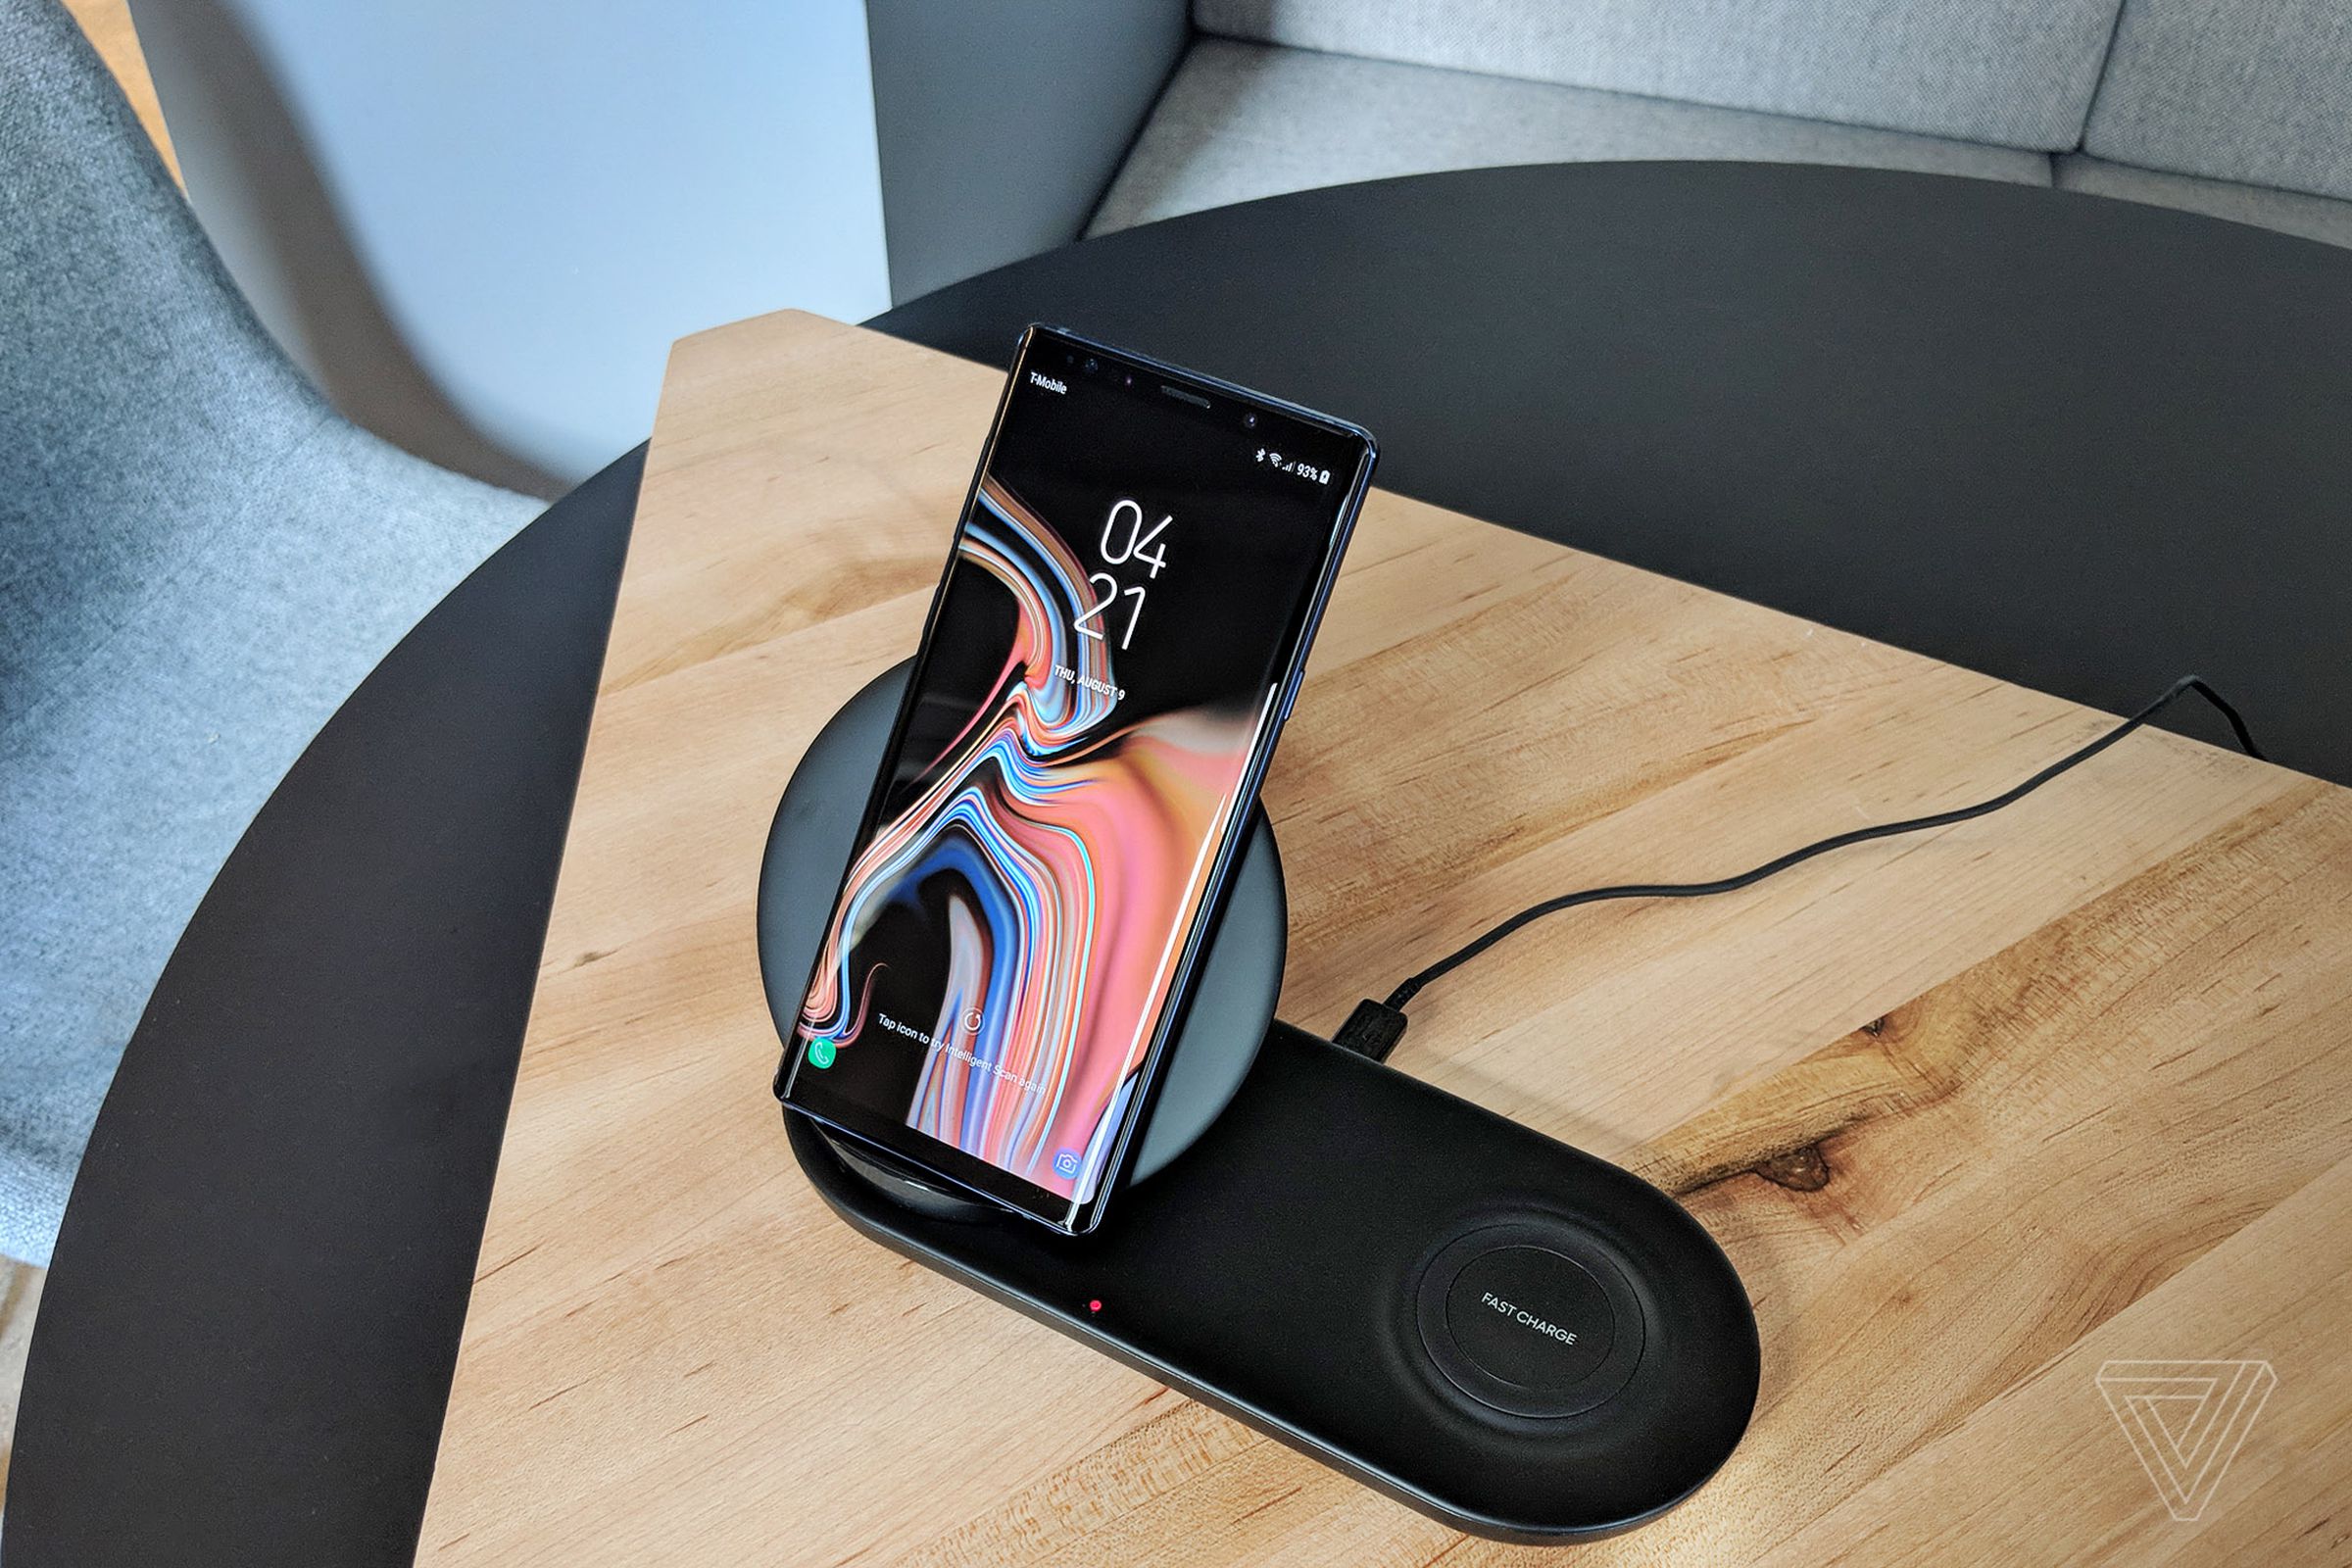 Samsung’s Wireless Charger Duo